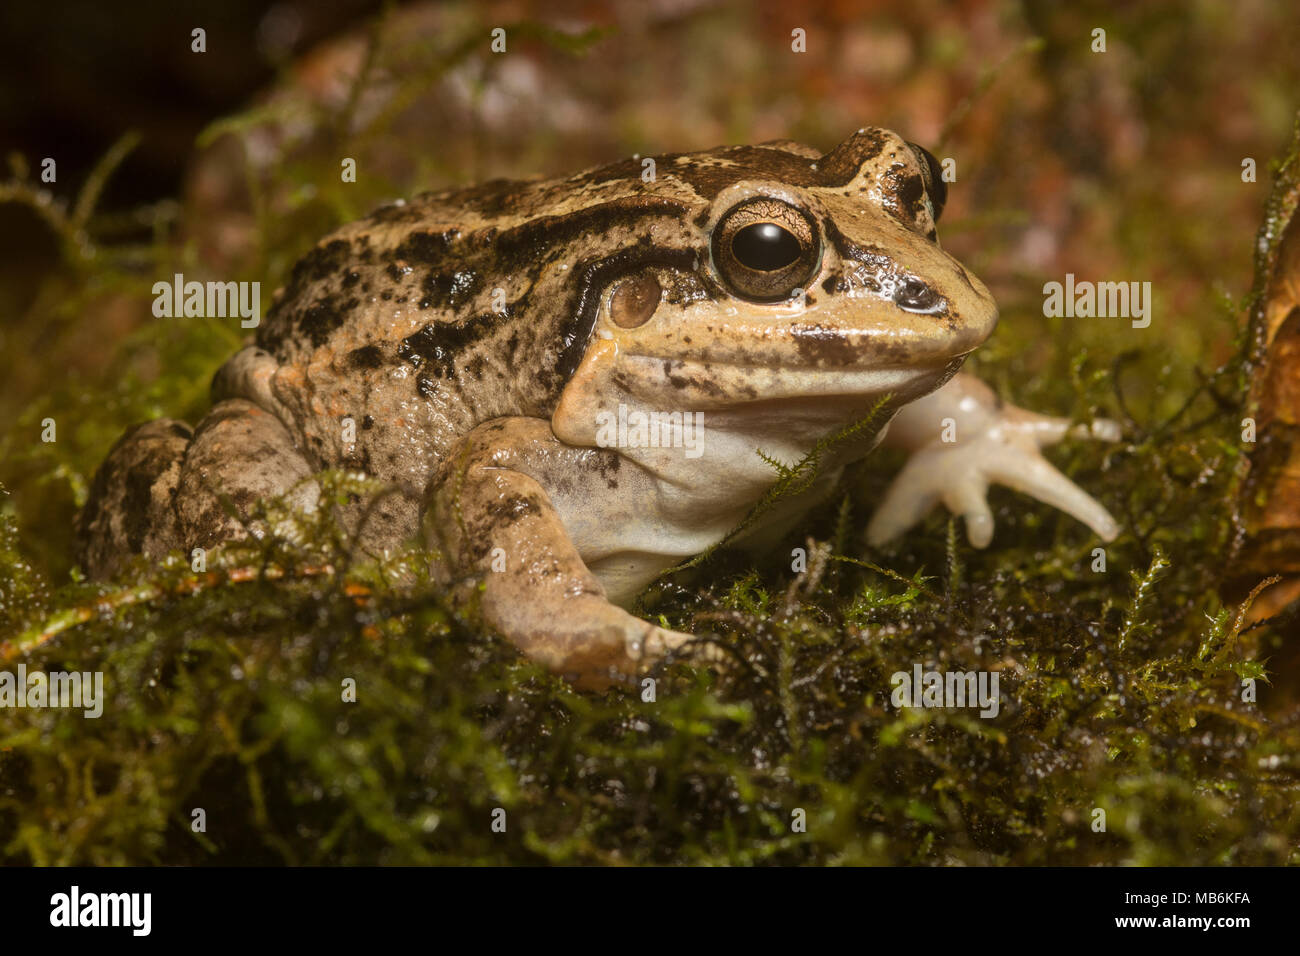 A tropical frog (Leptodactylus labrosus) in the family Leptodactylidae, an uncommon frog found in parts of Ecuador and Peru. Stock Photo